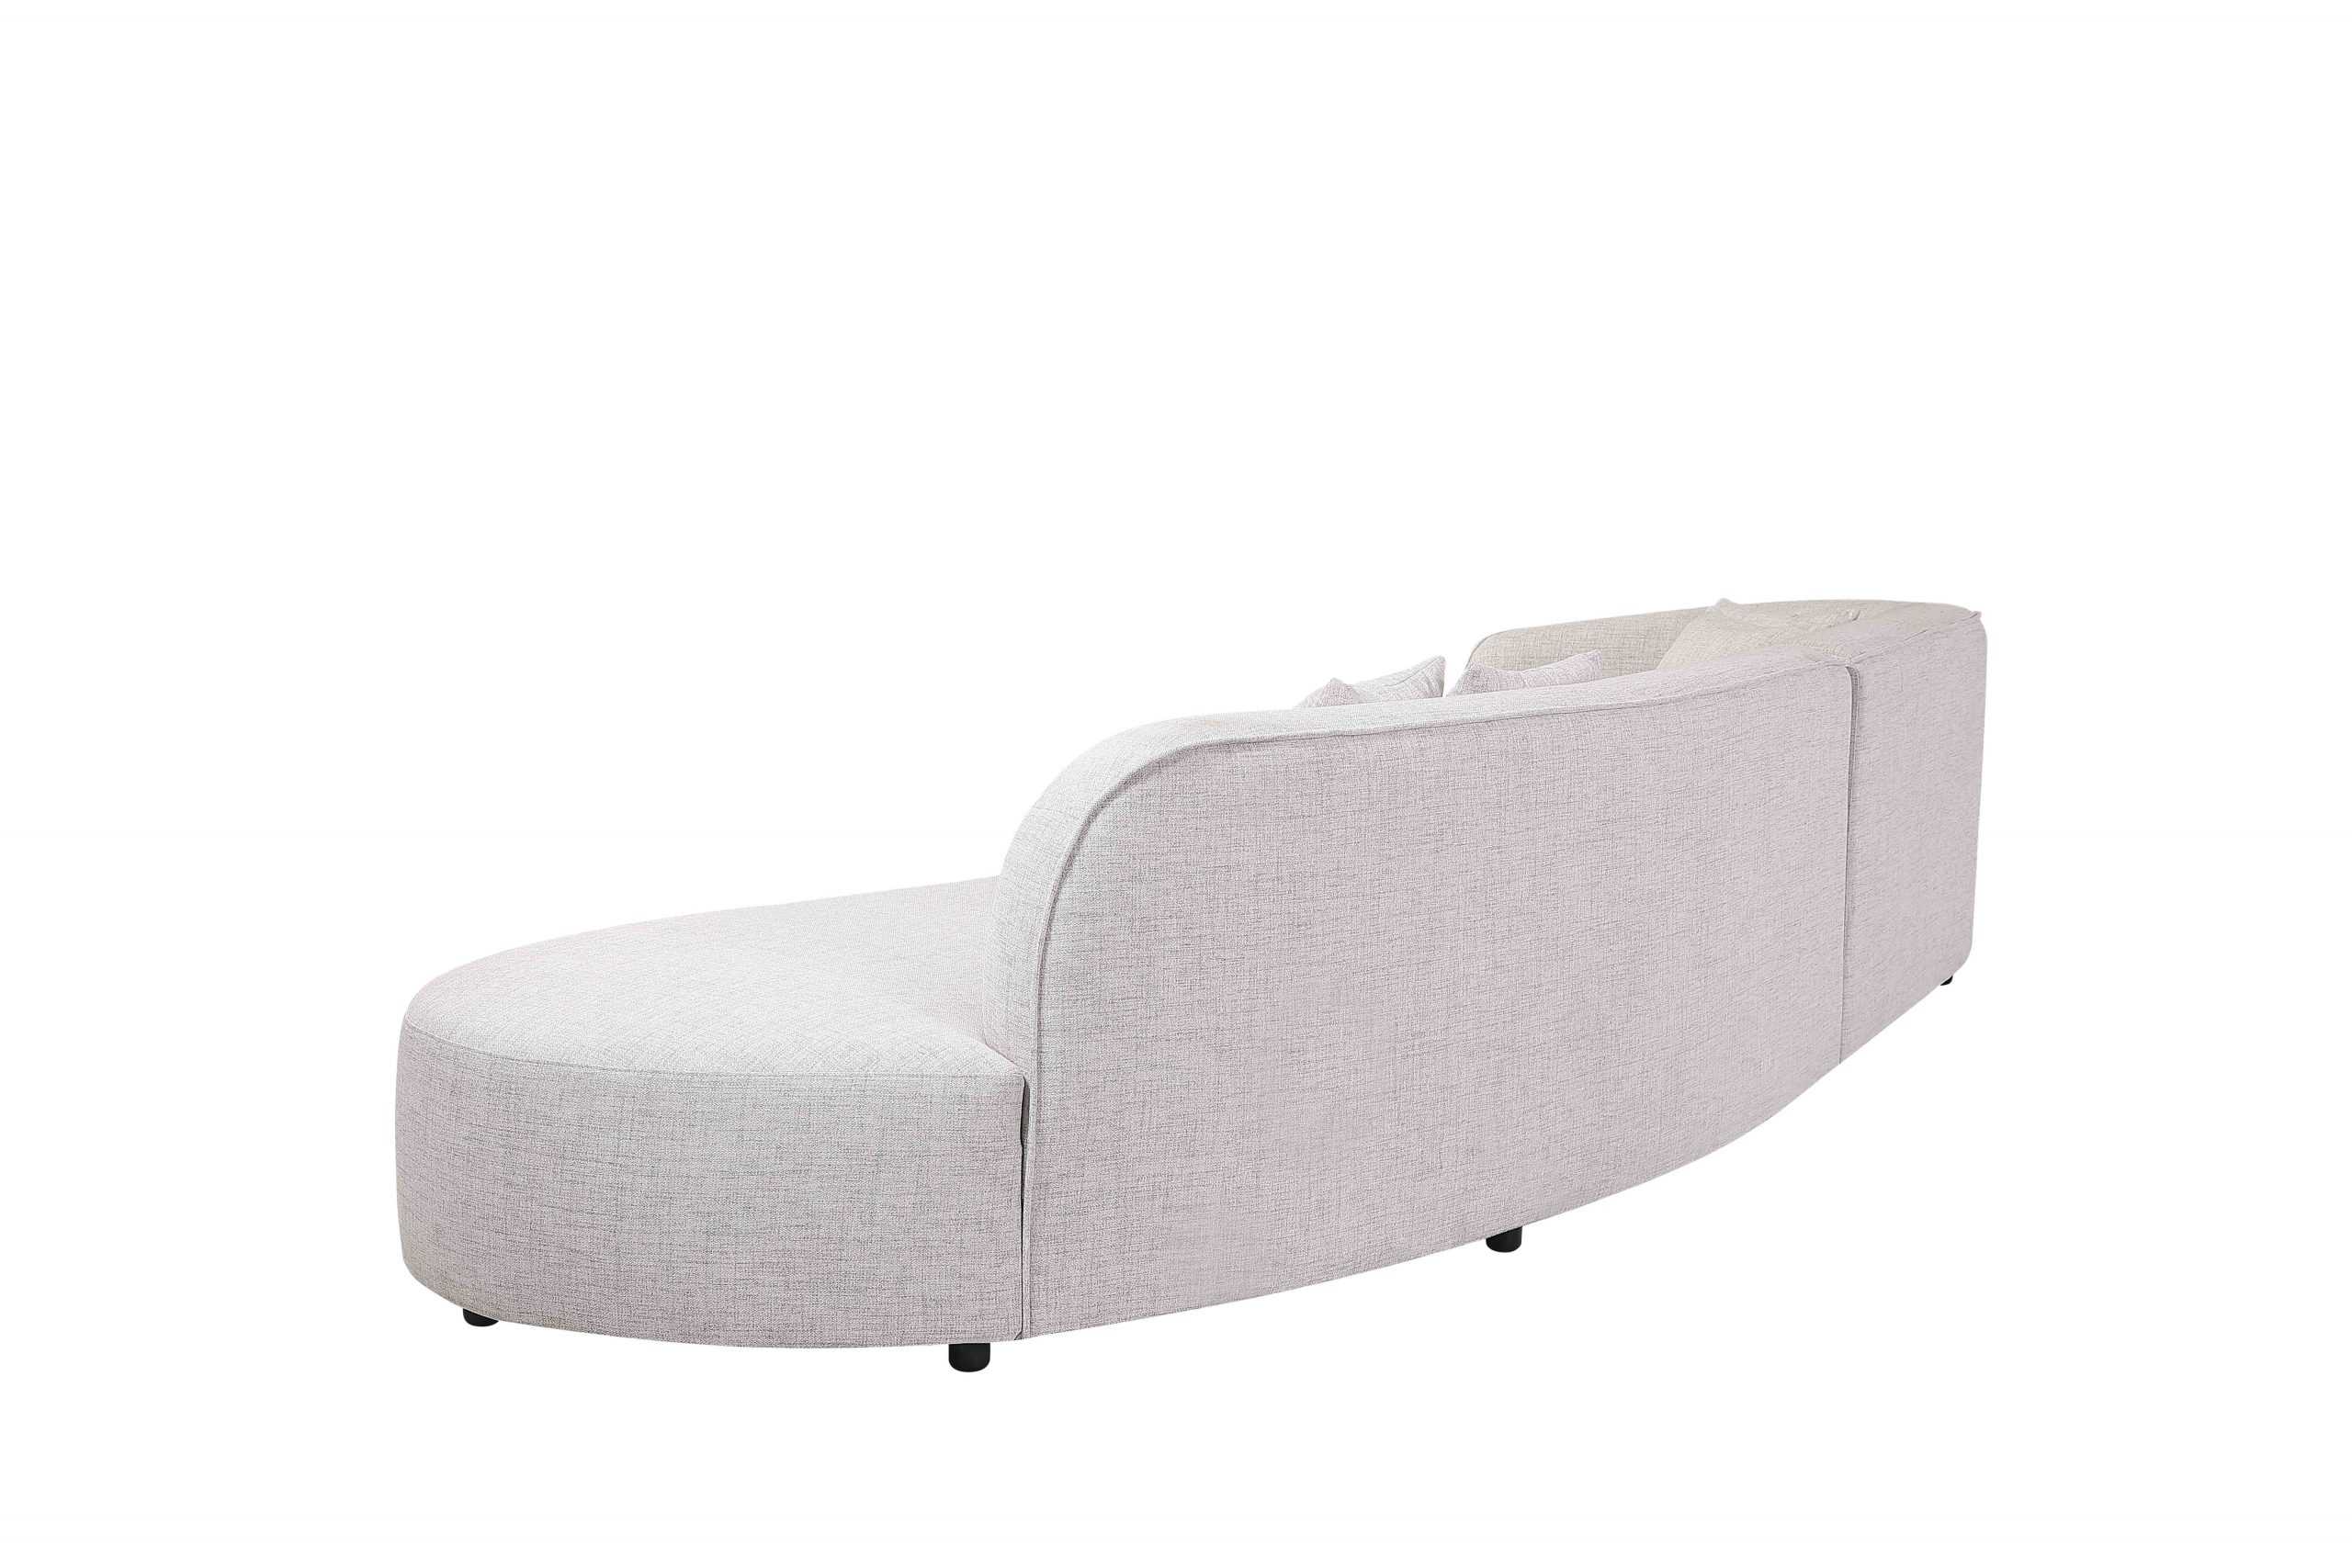 BT Willoughby Domus Fabric Upholstered 2 Seater Sofa